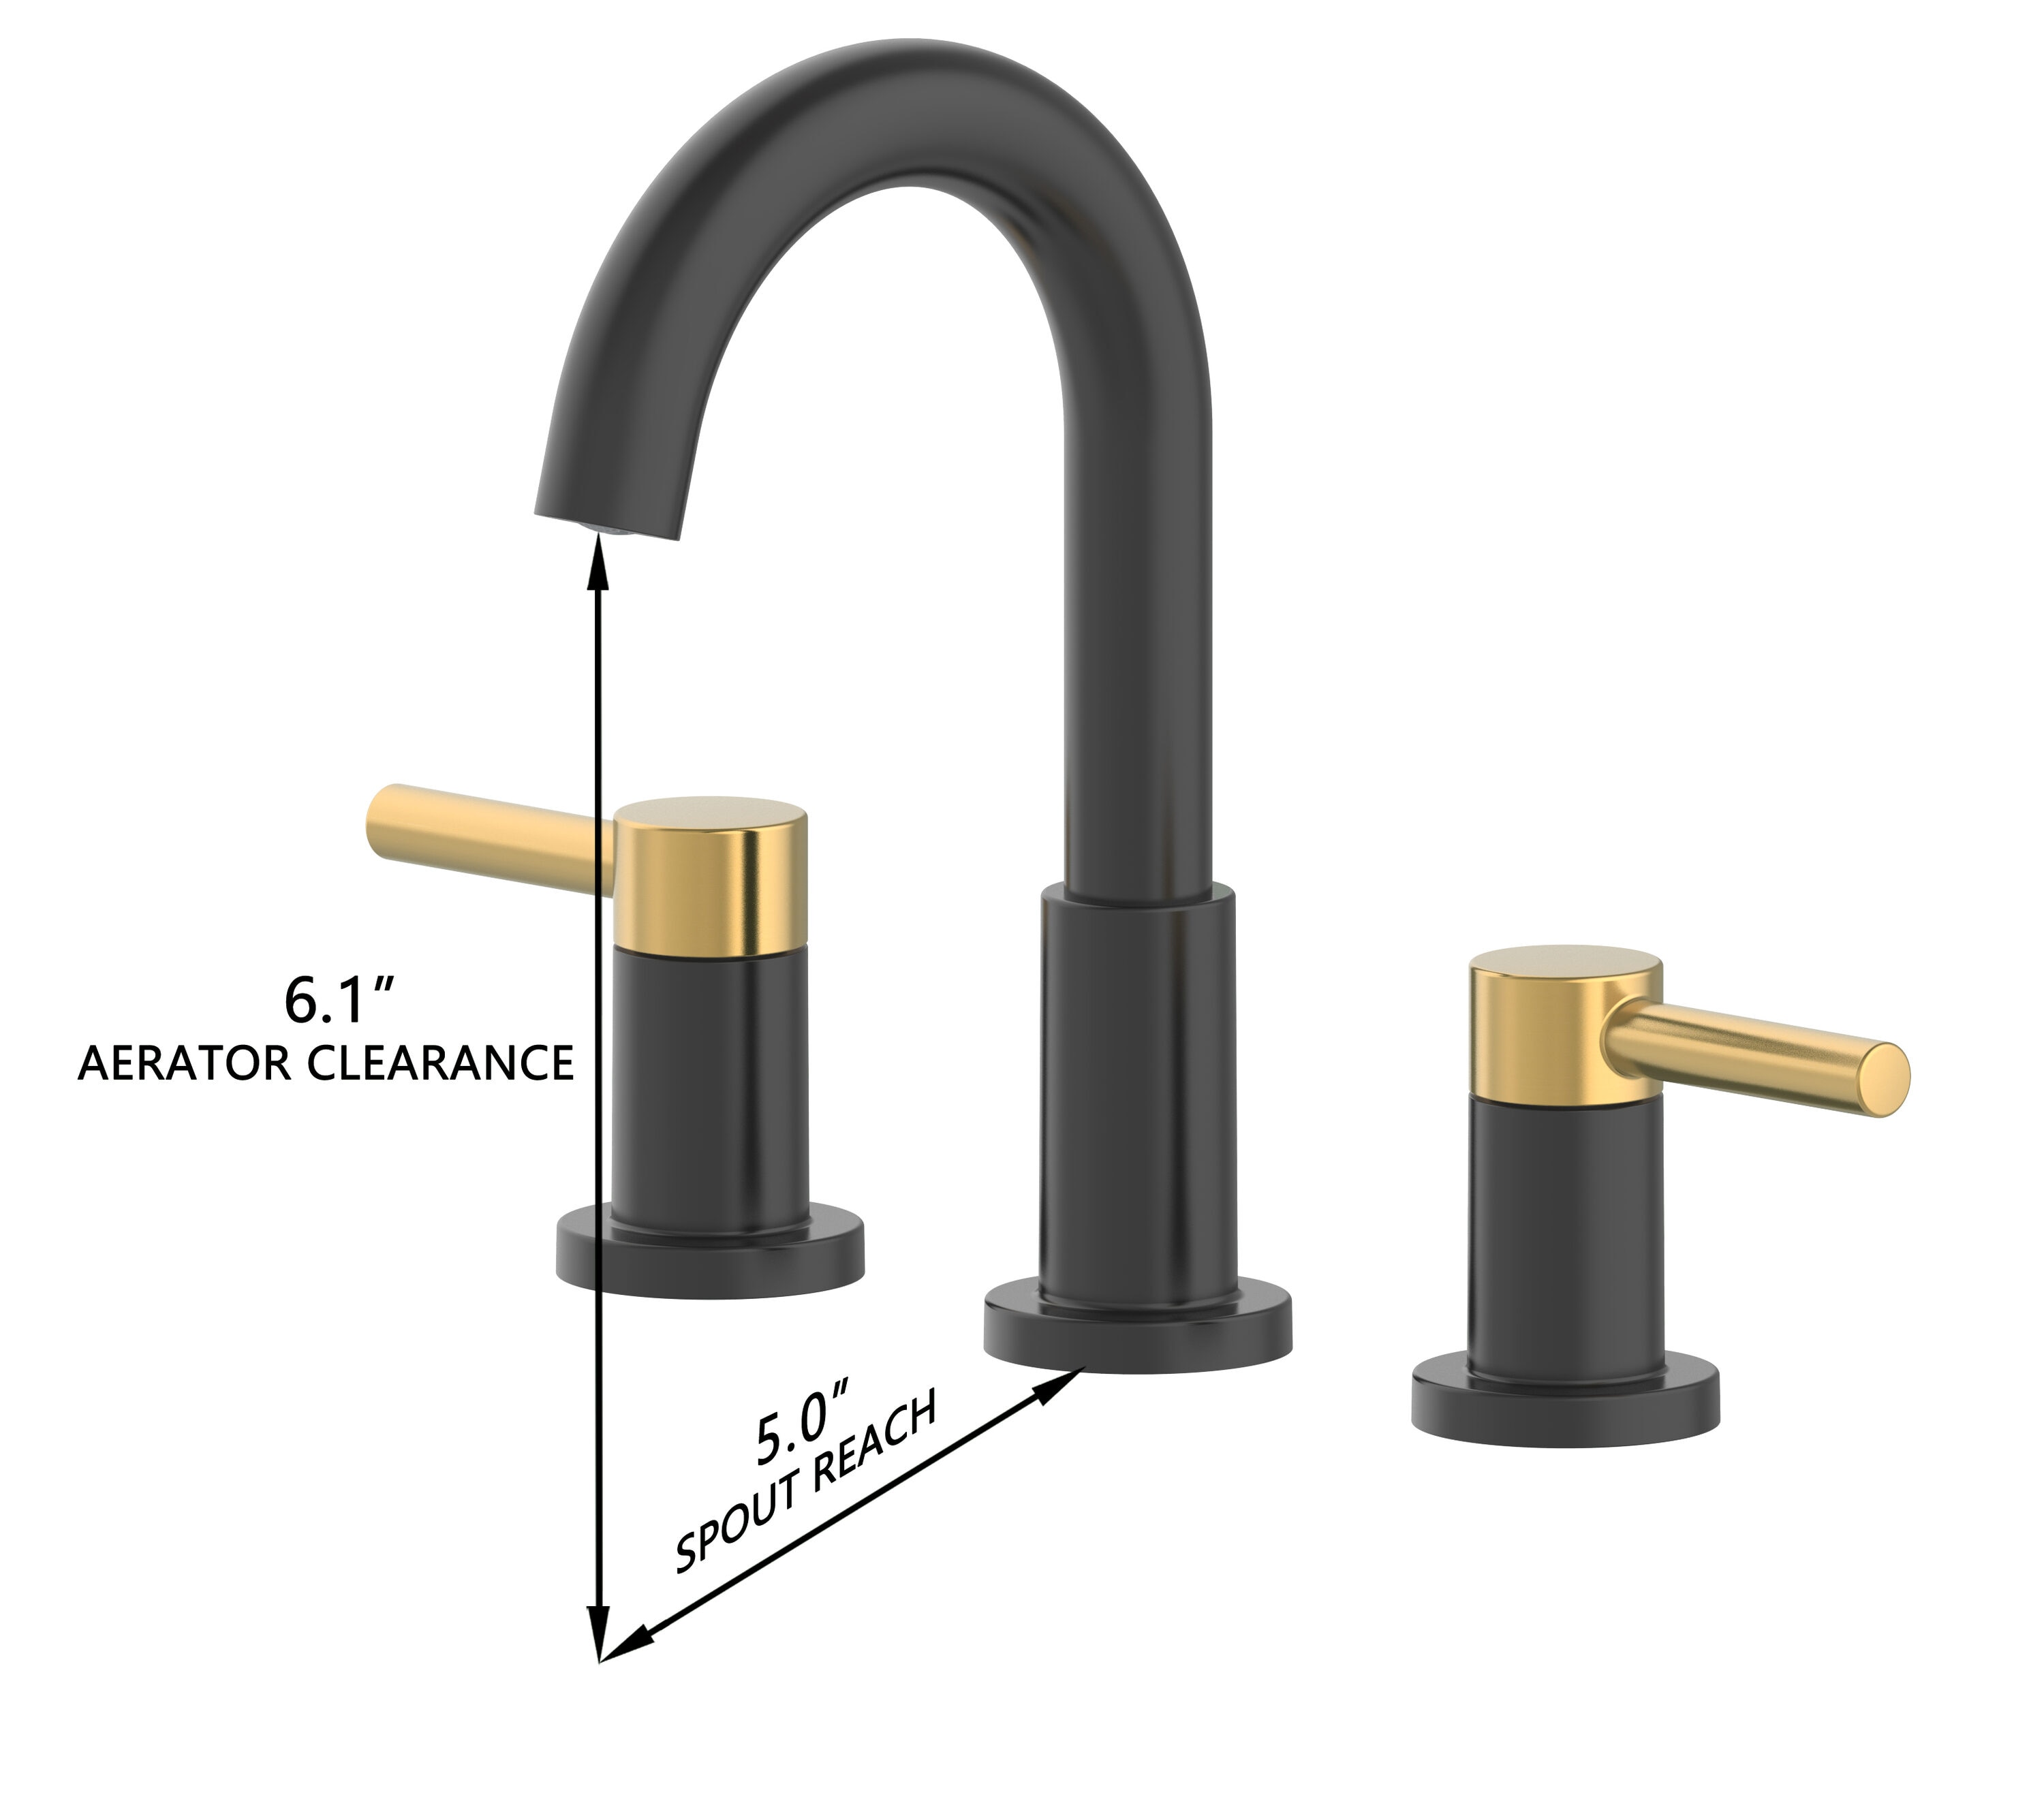 allen + roth Harlow Matte Black and Brushed Gold Widespread 2-Handle  WaterSense Bathroom Sink Faucet with Drain in the Bathroom Sink Faucets  department at Lowes.com